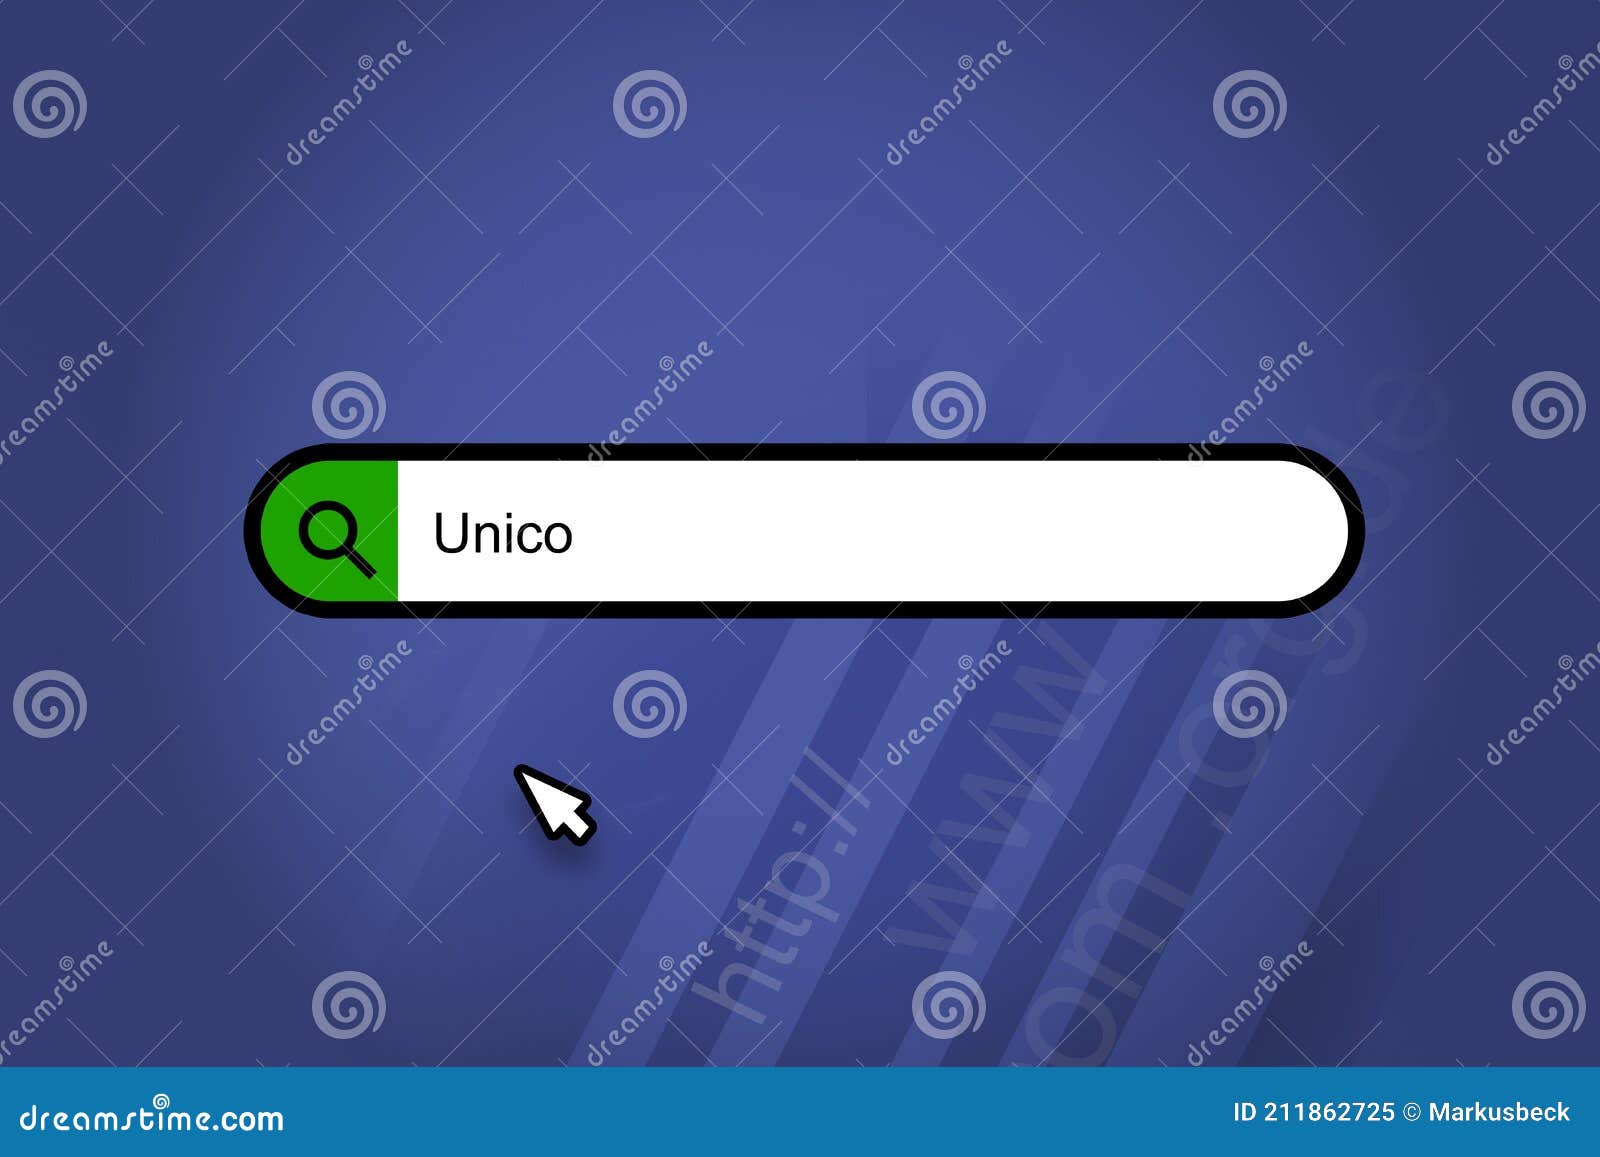 unico - search engine, search bar with blue background